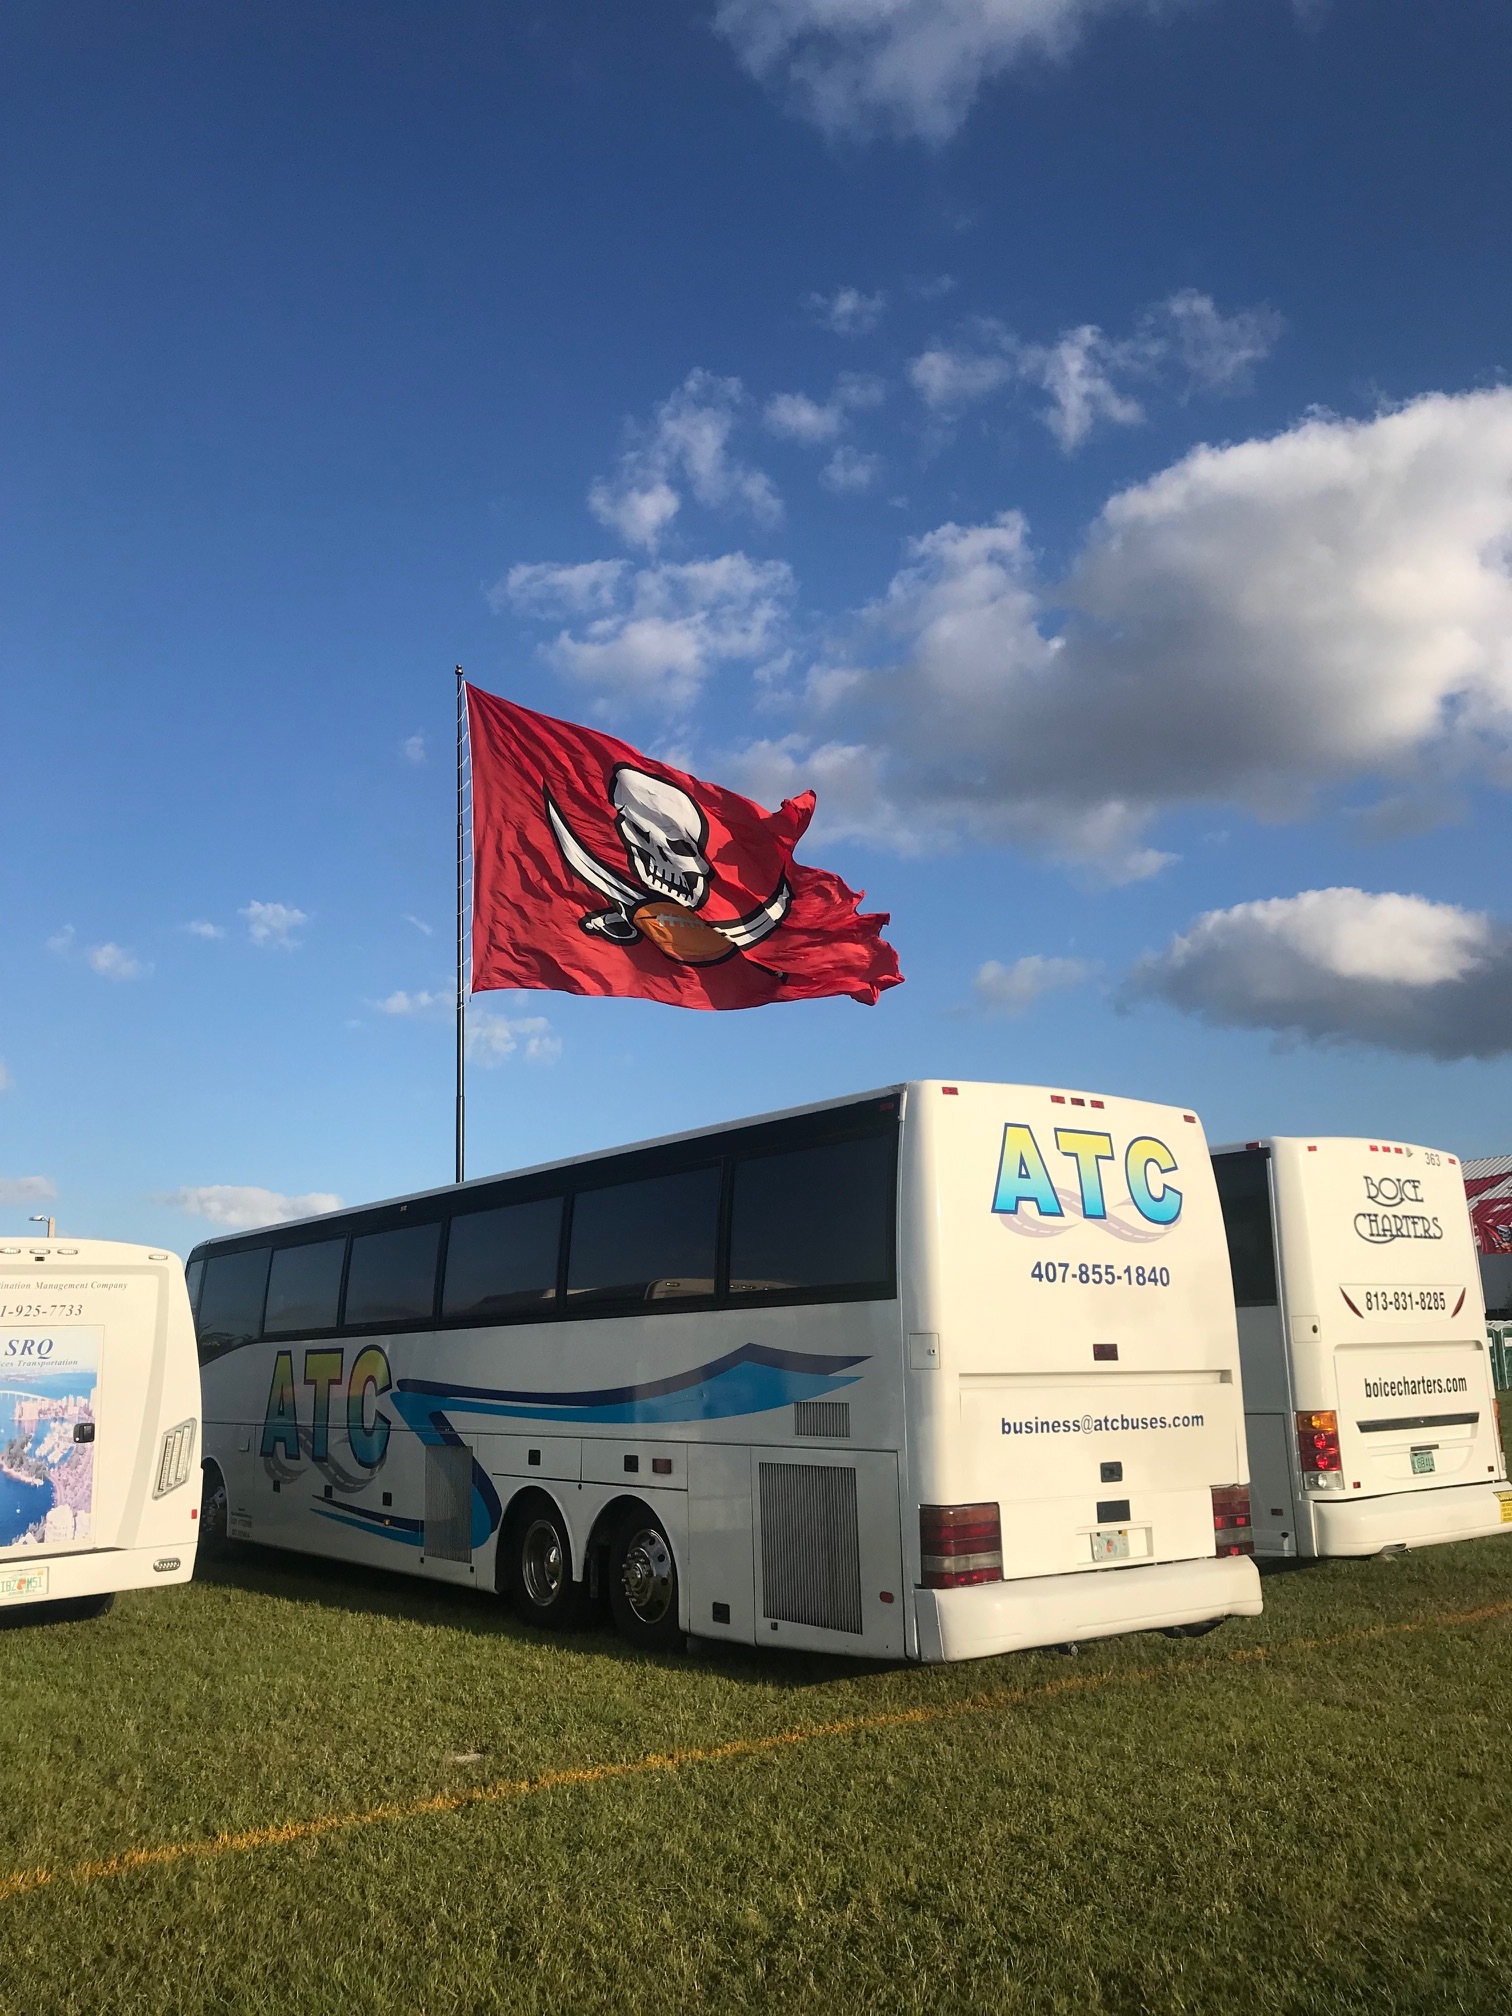 Article about ATC Buses in Florida: Orlando - Miami - Tampa - Daytona Beach and more...